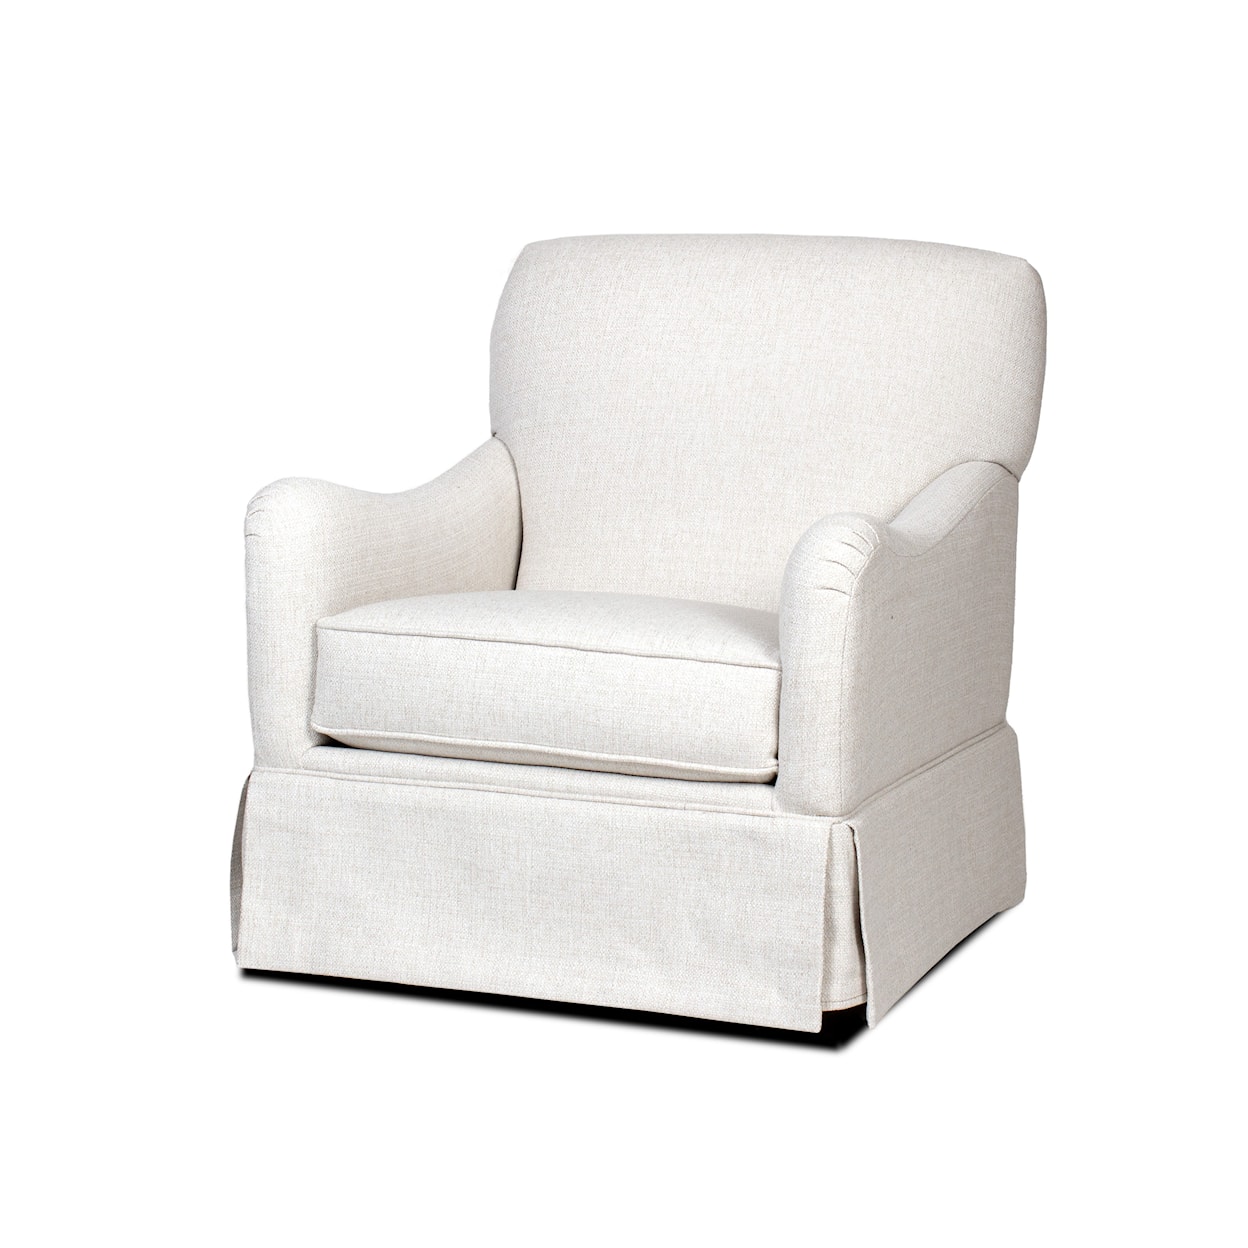 Chairs America Accent Chairs and Ottomans Sugarshack Glacier Swivel Glider